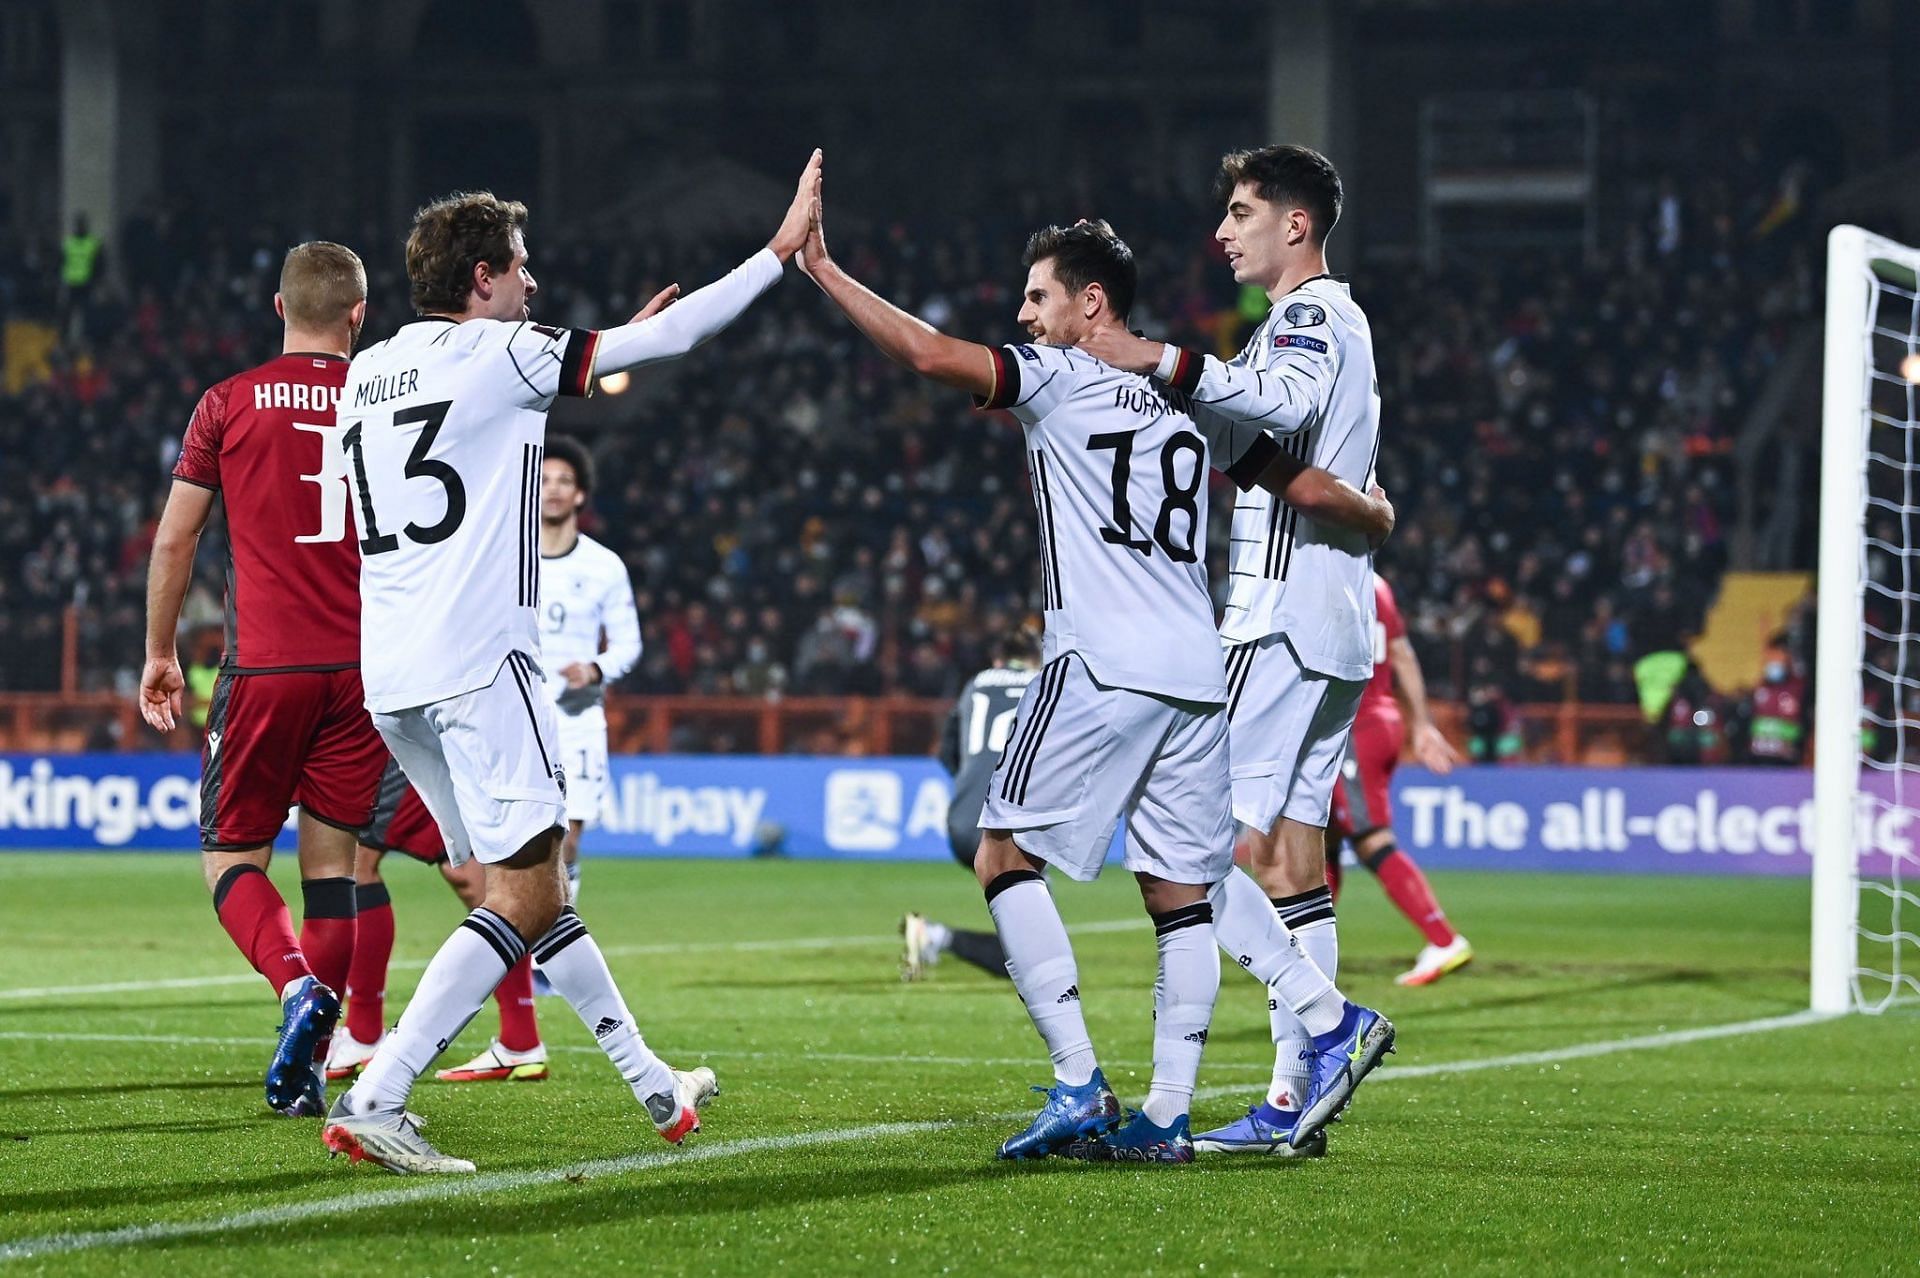 England recorded double figures in goals against San Marino.